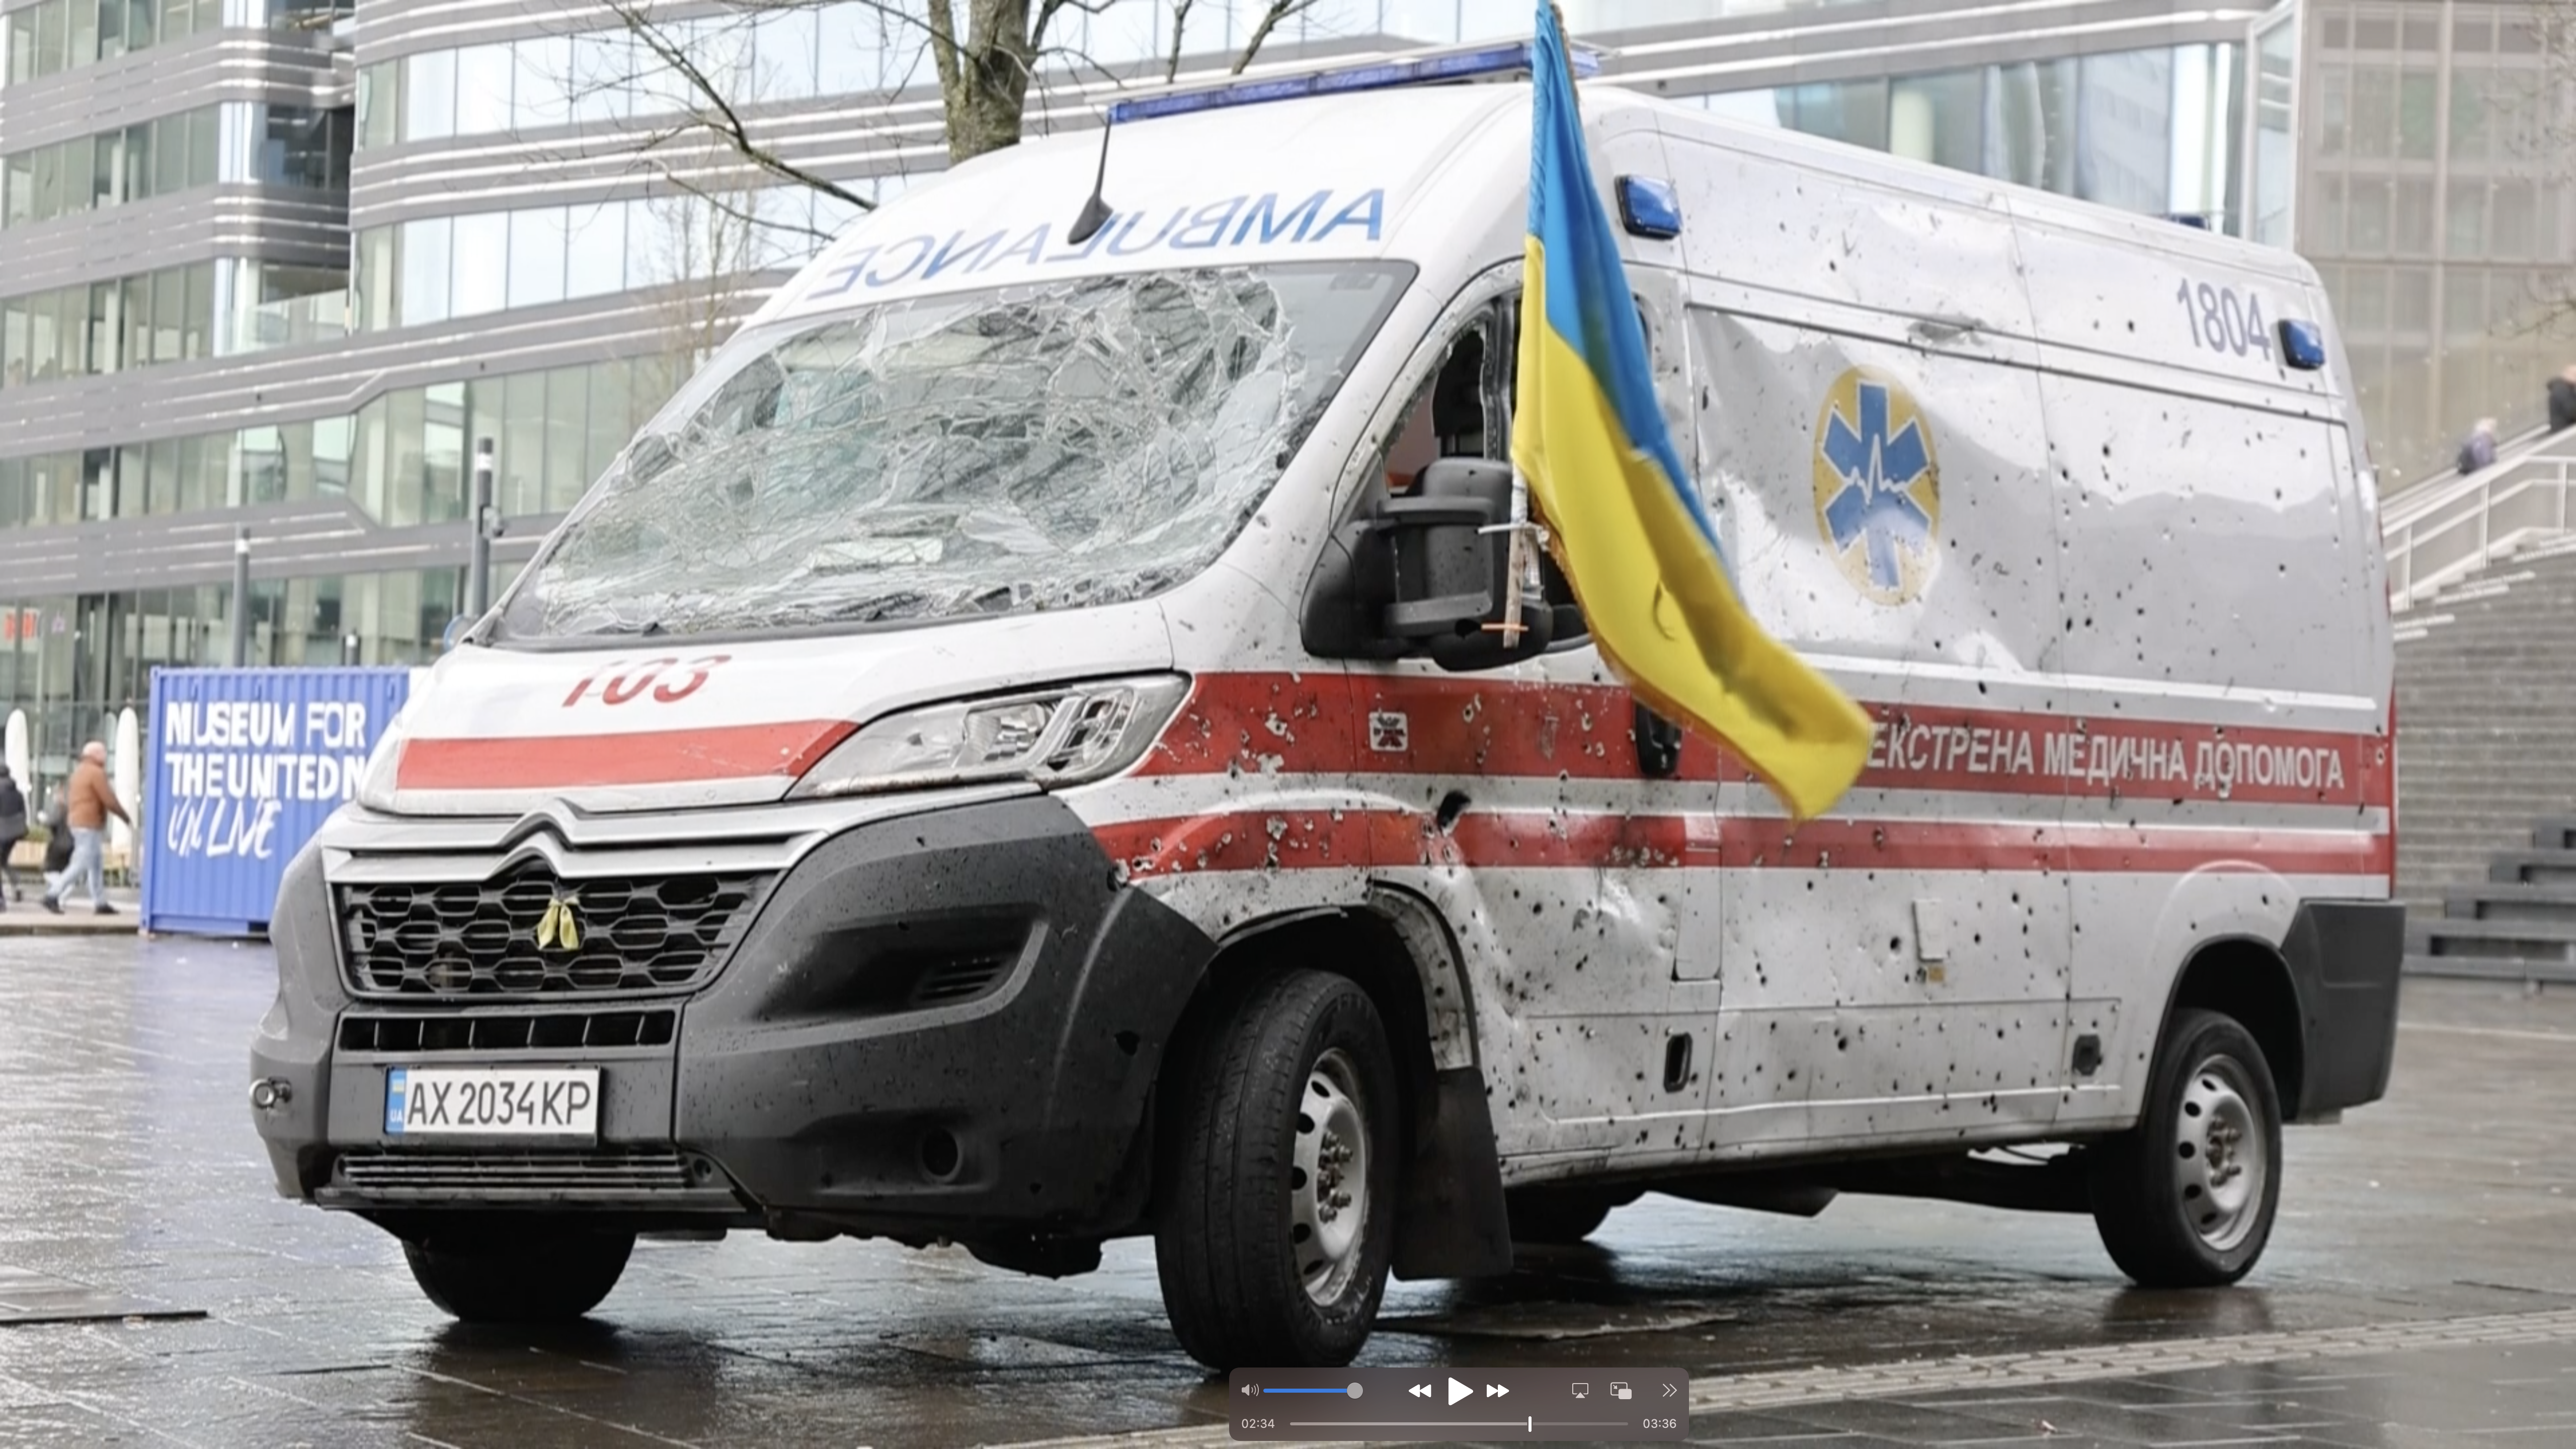 According to the World Health Organization, 442 Ukrainian ambulances and 218 hospitals have been destroyed since the start of the conflict./CGTN.